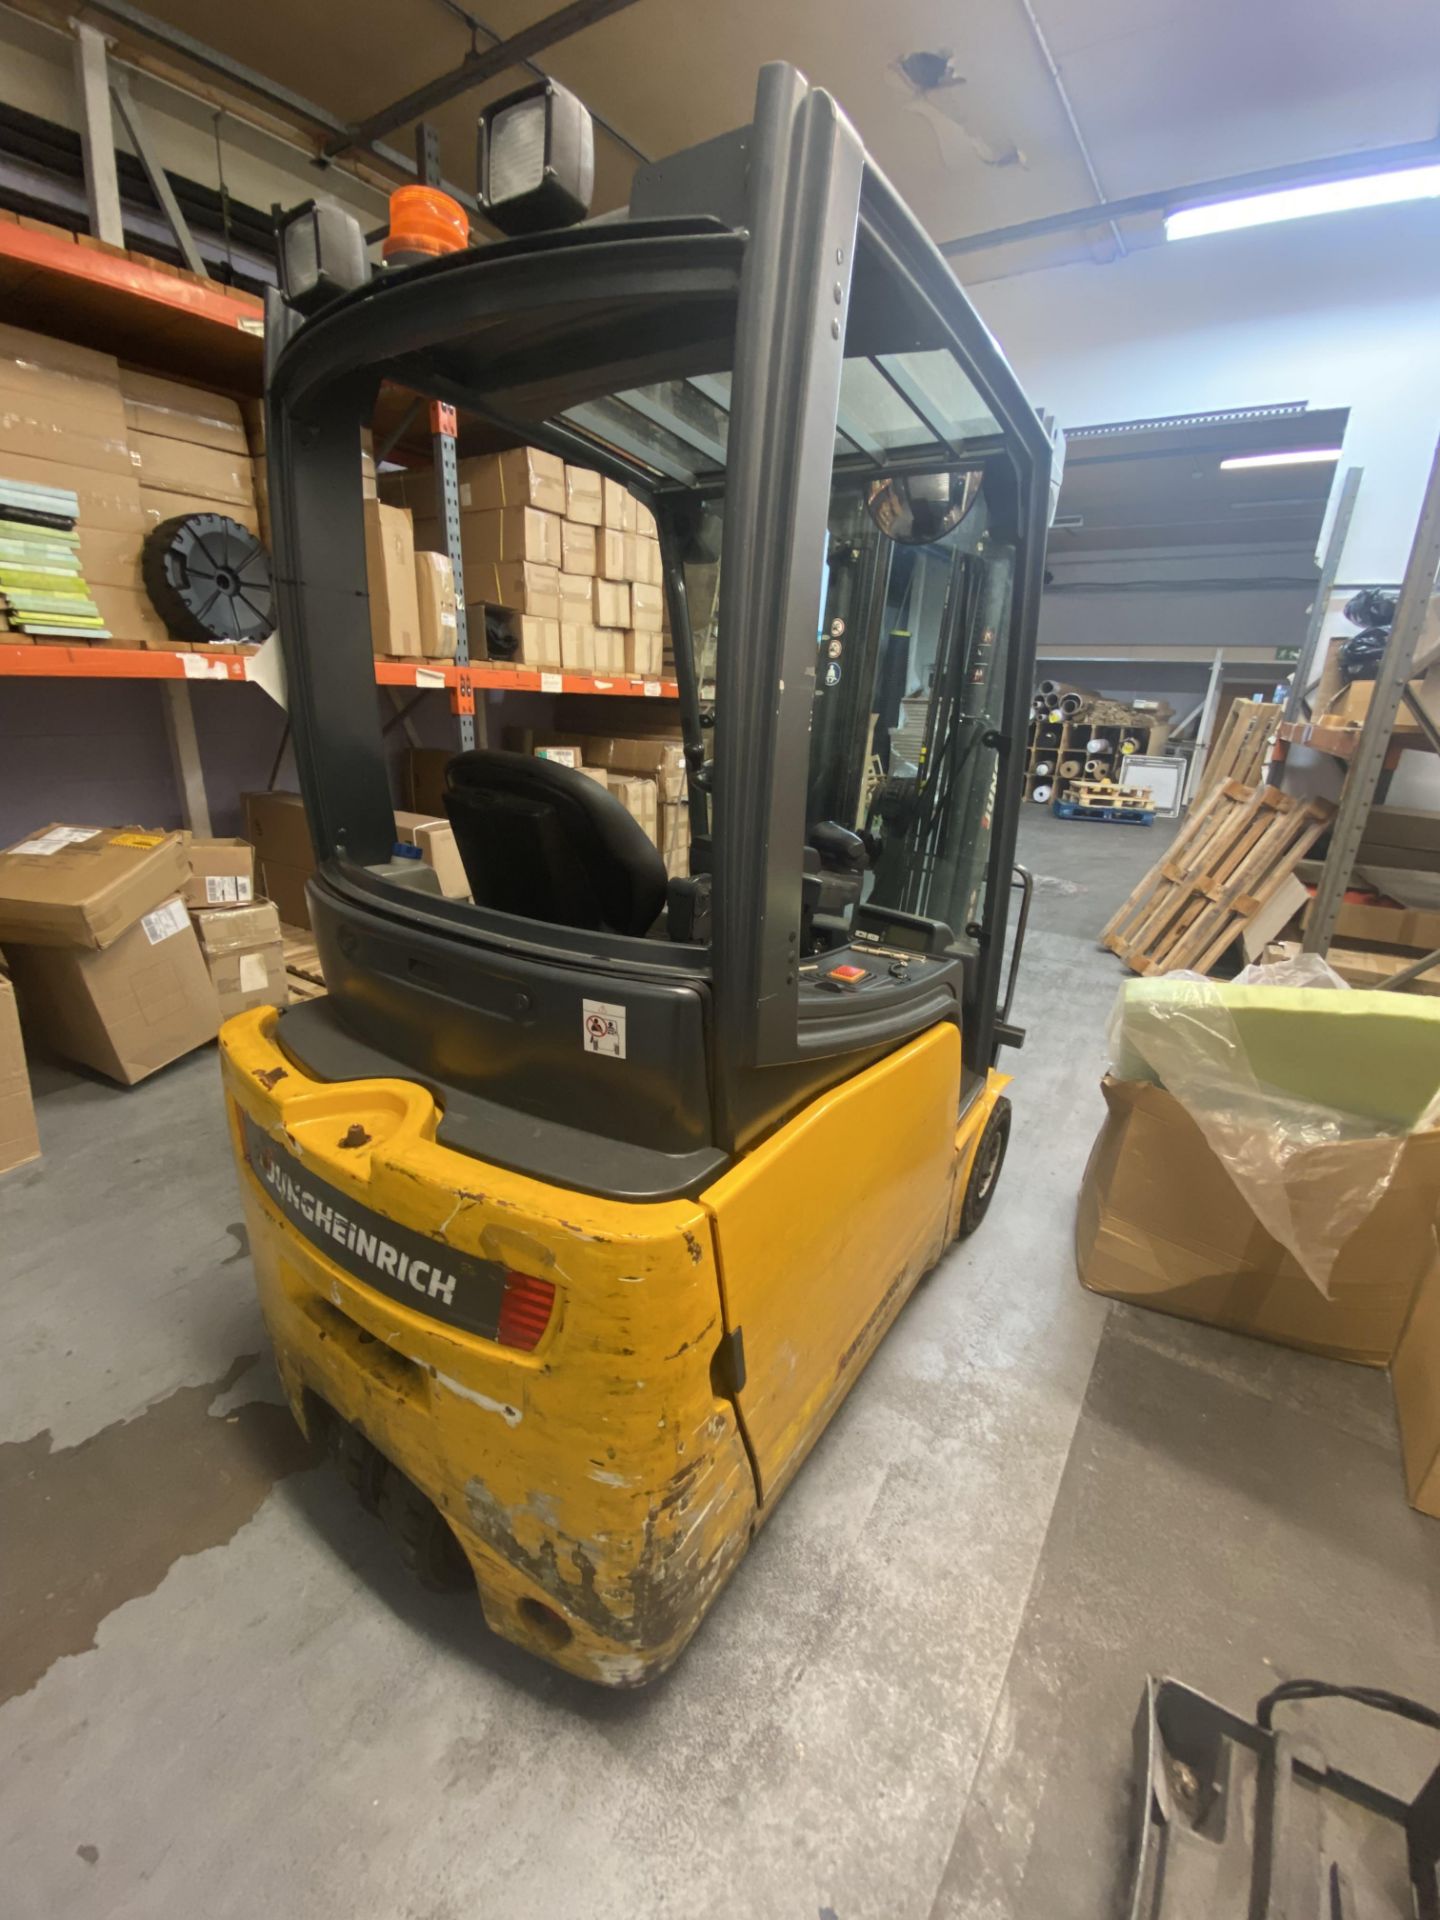 Jungheinrich EFG 216 1600KG CAP. BATTERY ELECTRIC FORK LIFT TRUCK, serial no. FN42413, indicated - Image 4 of 9